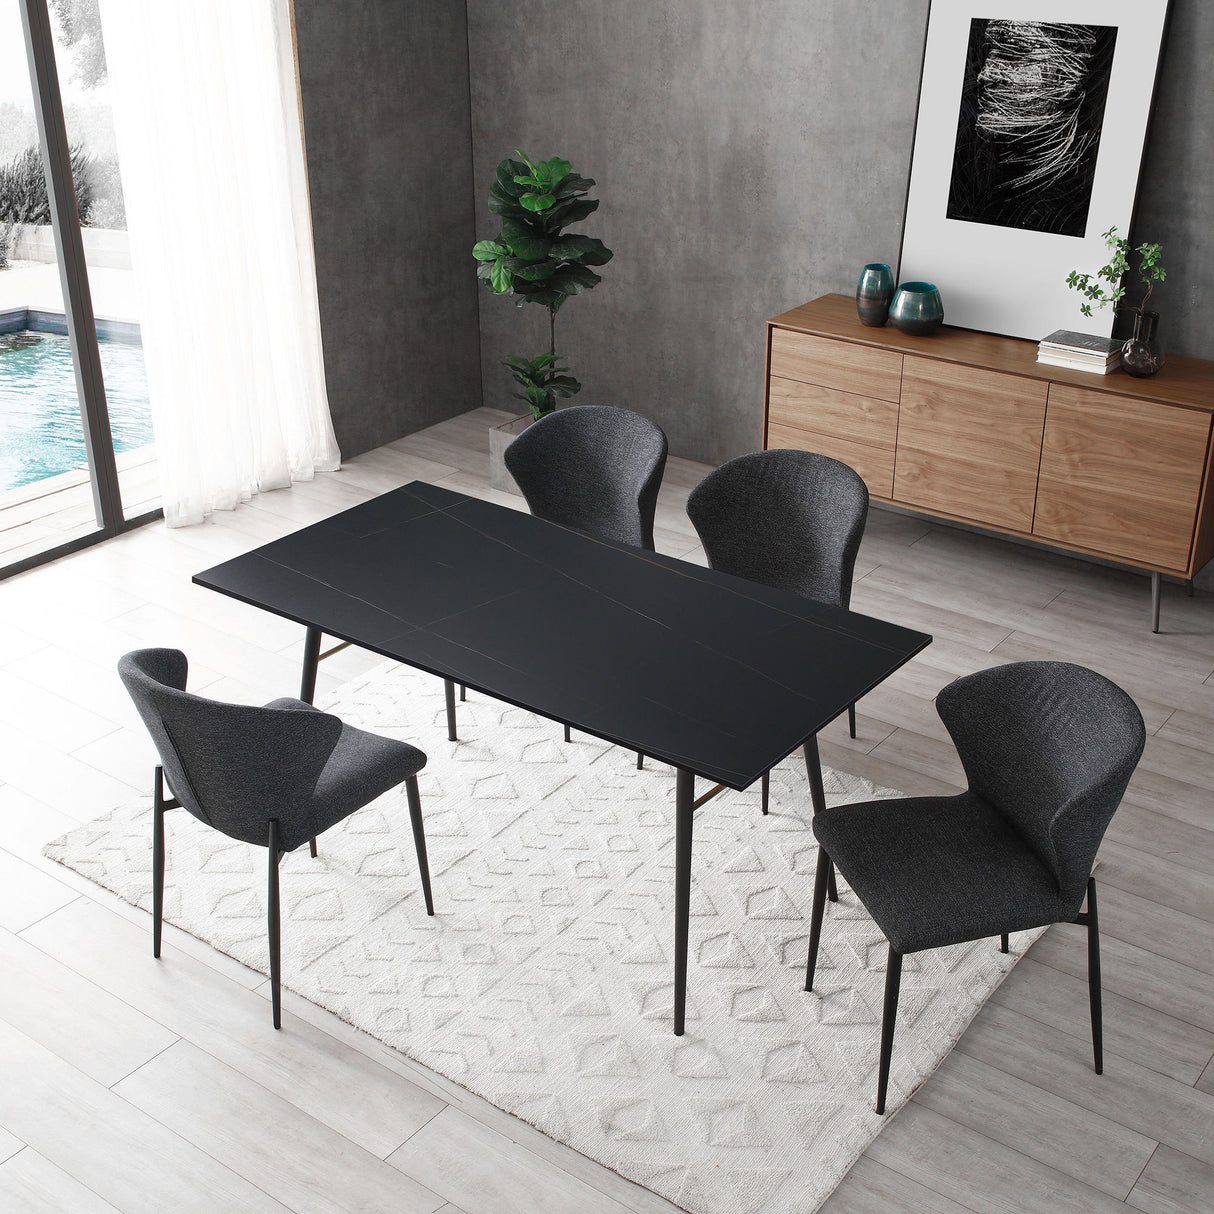 Dining Table Ceramic Tile Kitchen Table Small Space Dining Table for kitchen living room or office Black 62inch - Home Elegance USA